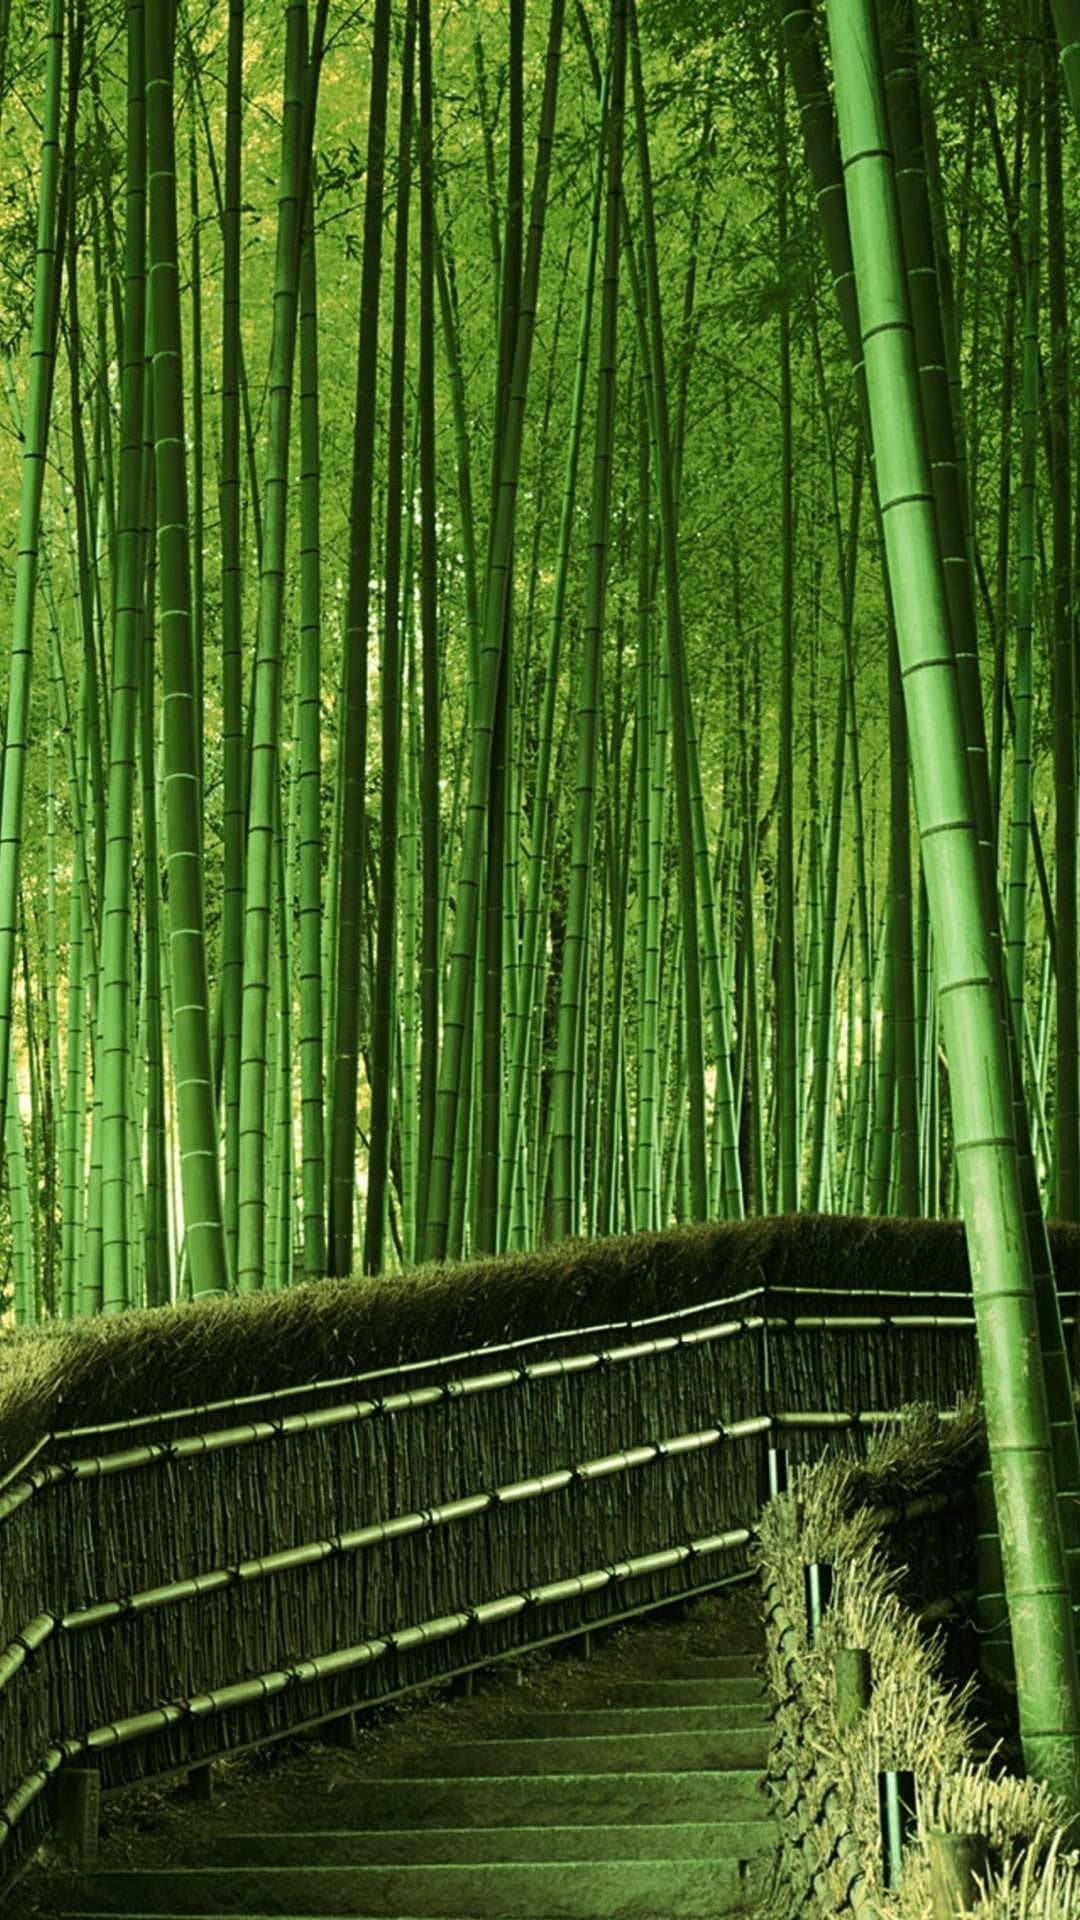 Full Bamboo Stair Path IPhone Wallpaper